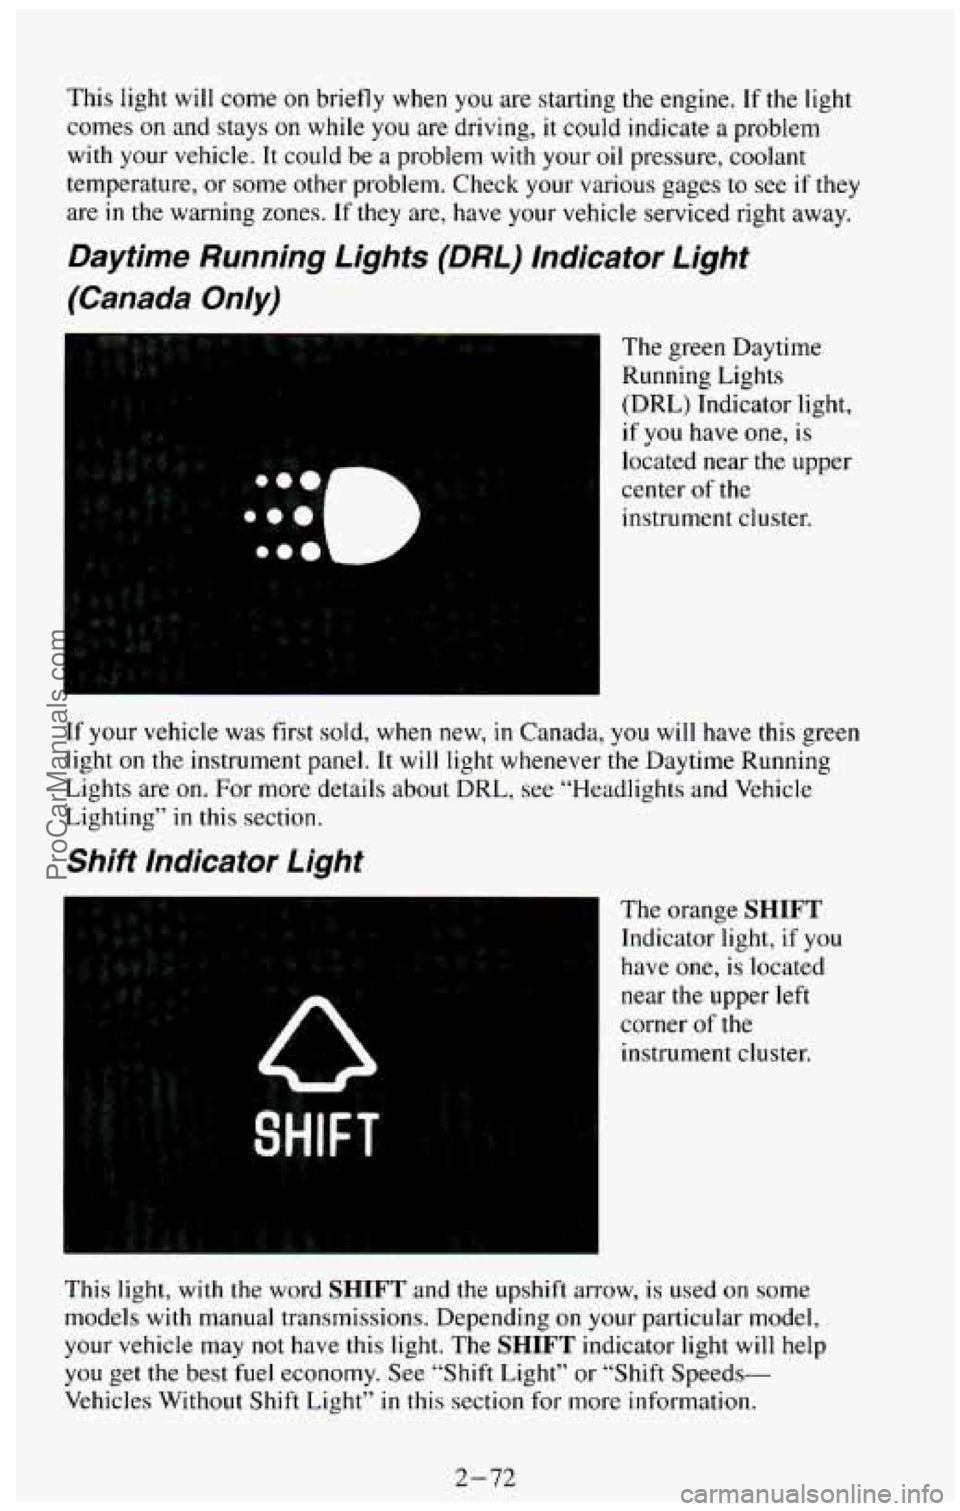 CHEVROLET SUBURBAN 1994  Owners Manual This light  will come on briefly  when  you  are  starting  the  engine. If the  light 
comes 
on and  stays on while you are  driving,  it could  indicate  a problem 
with  your  vehicle.  It could  